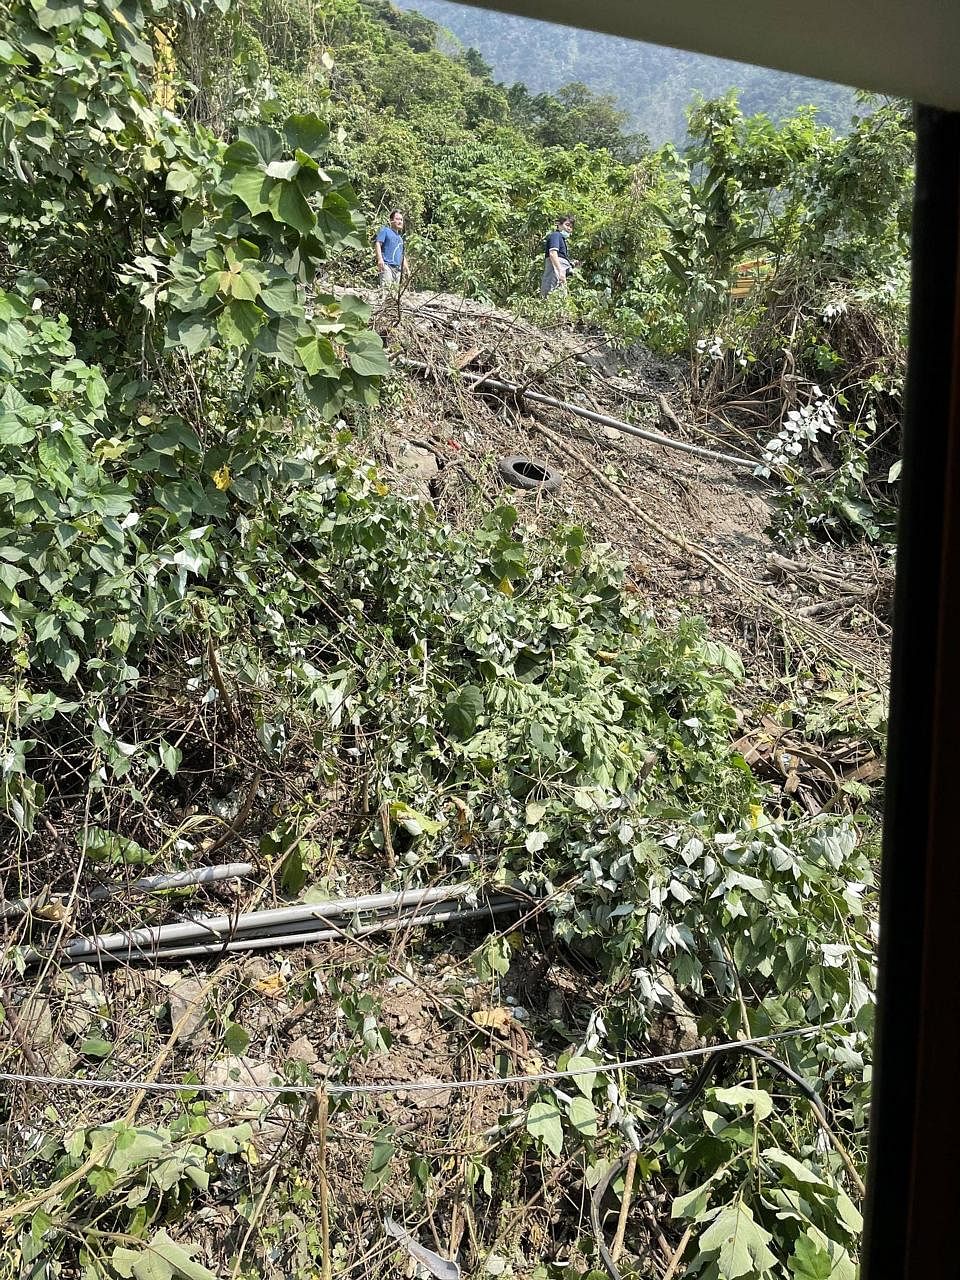 A passenger, known only as Mr Lee, said he took this photo from his window in the last train carriage of the 408 Taroko Express after the crash on Friday. The photo was posted on Taiwan's popular online bulletin system PTT. It shows Mr Lee Yi-hsiang 